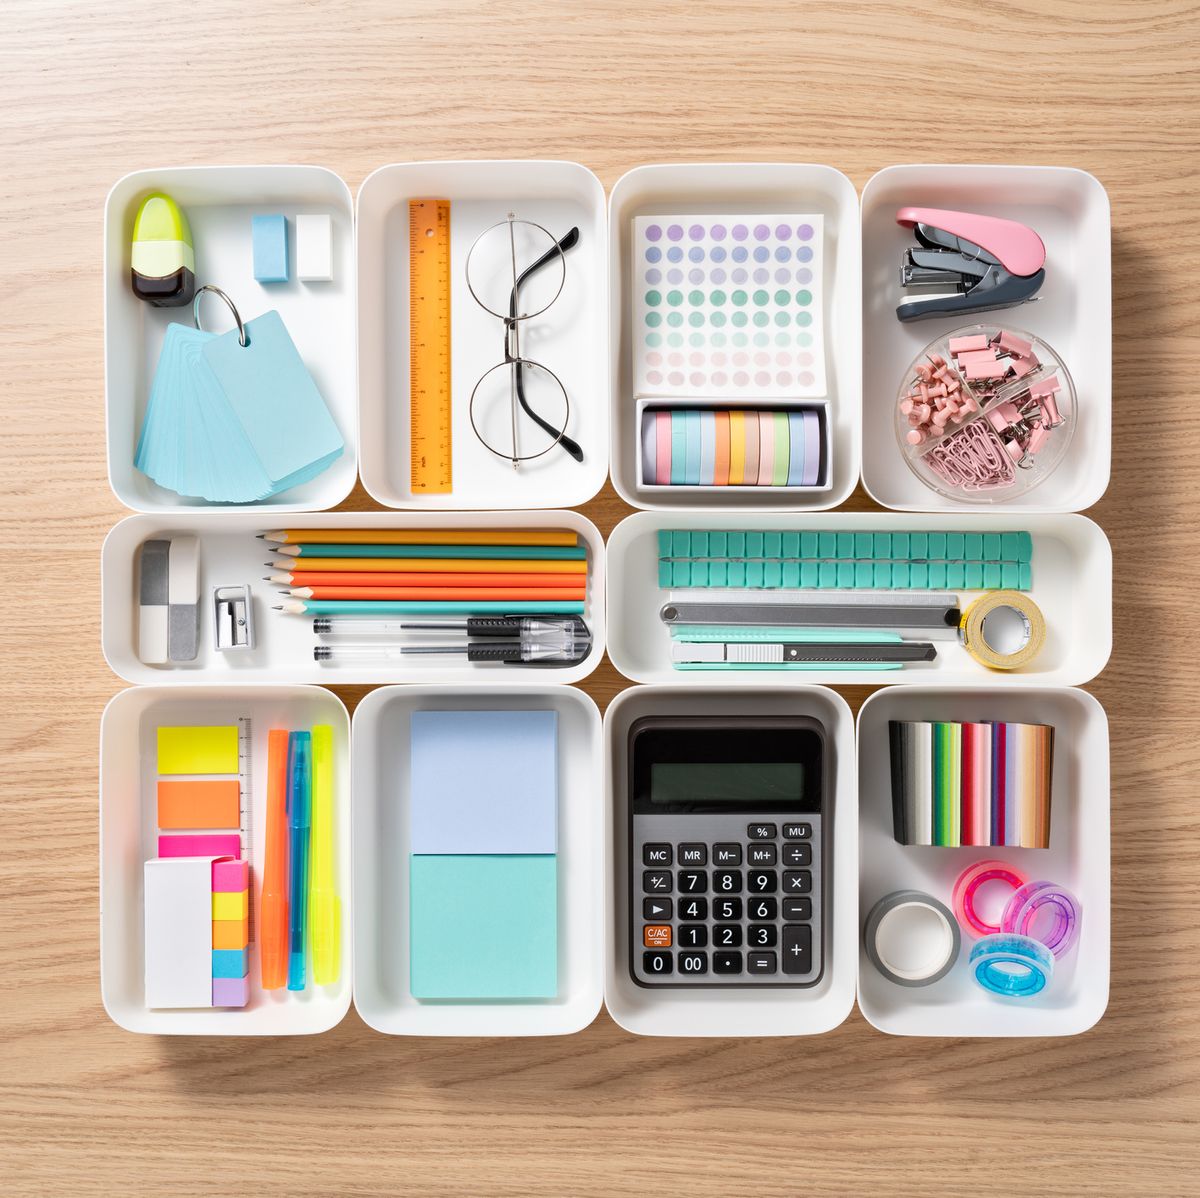 Smart Gifts For Organised People - Make Things Even Easier